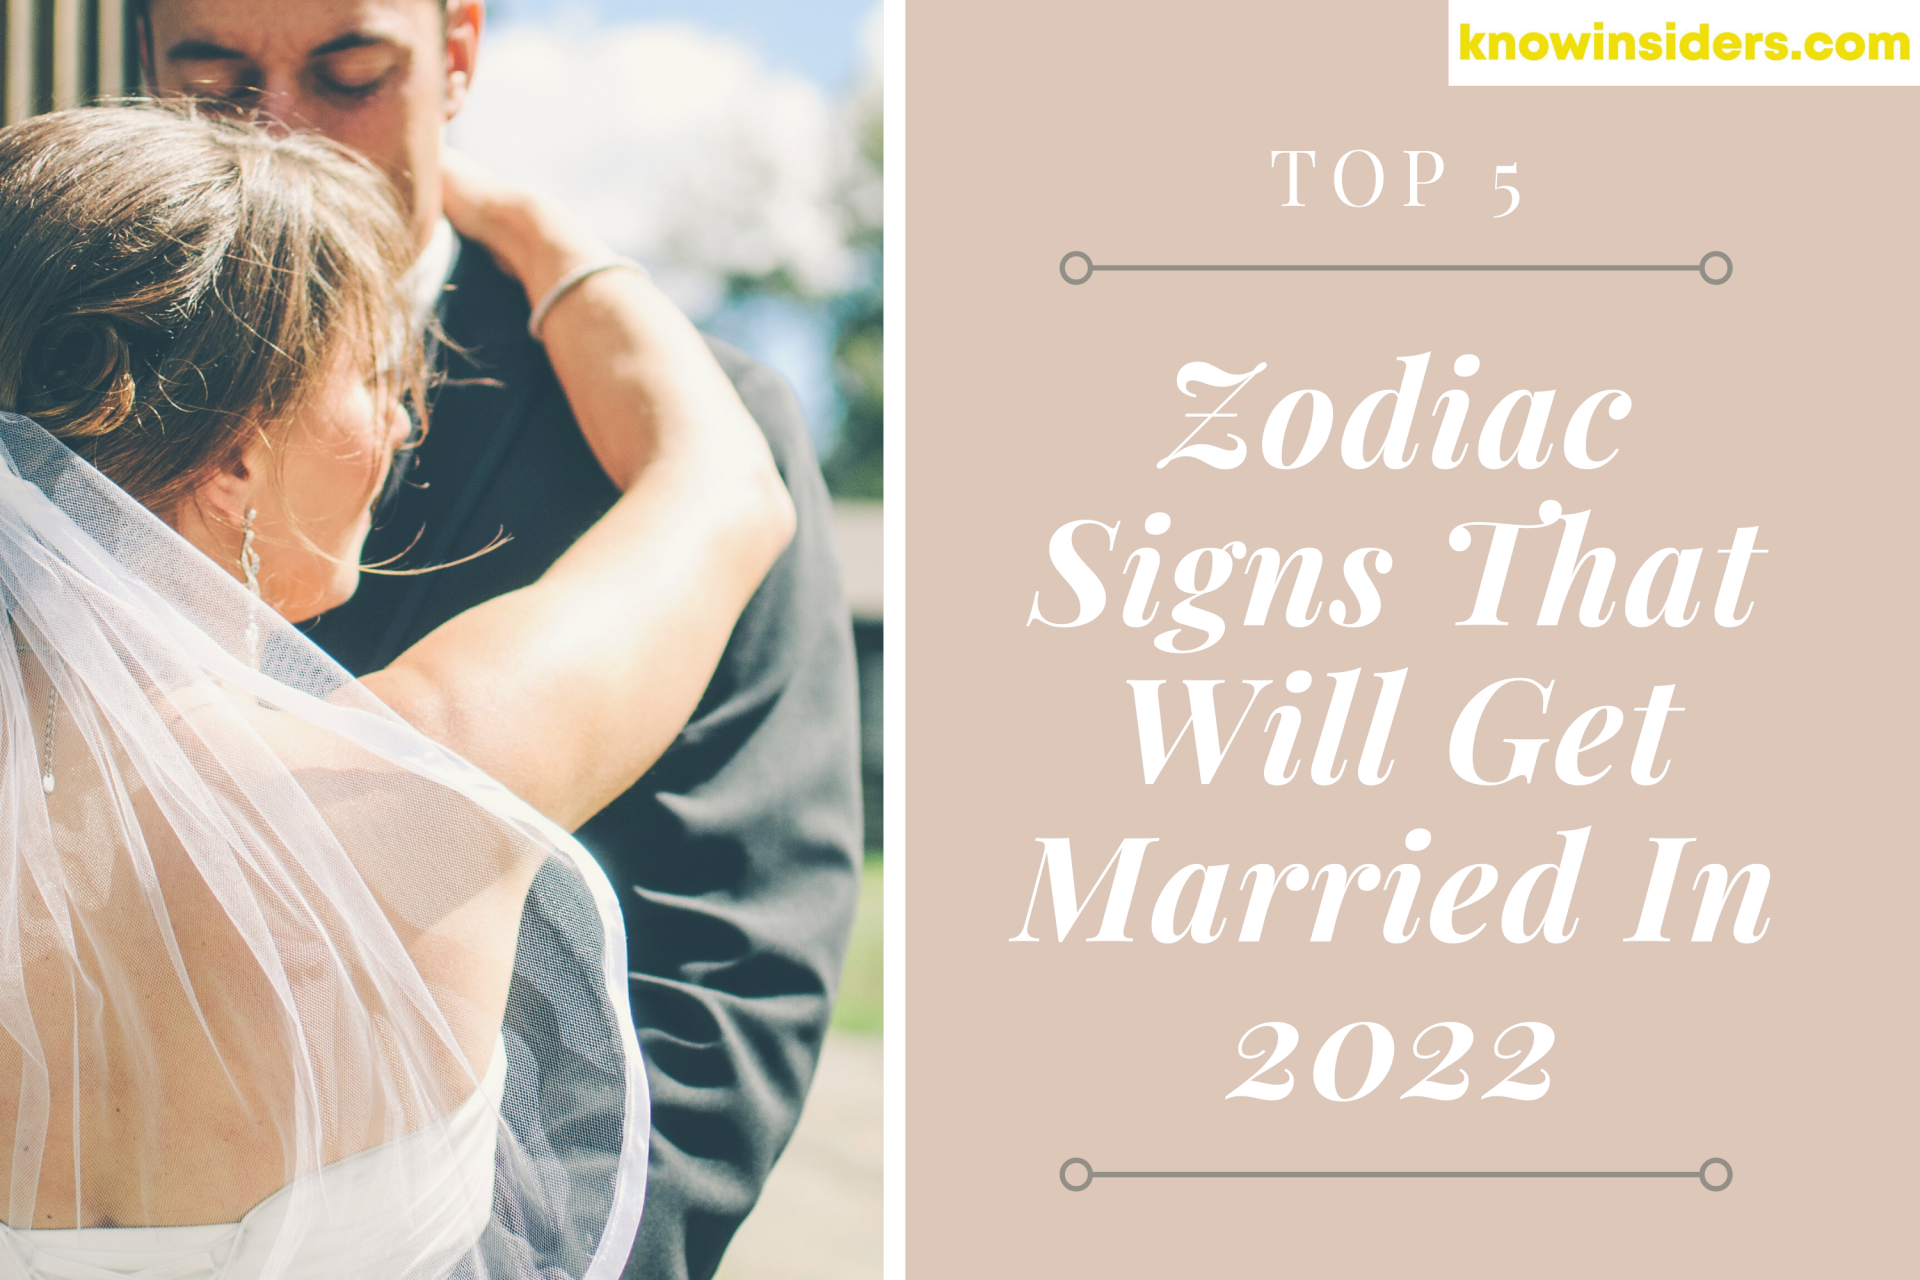 Top 5 Zodiac Signs Who Will Get Married In 2022